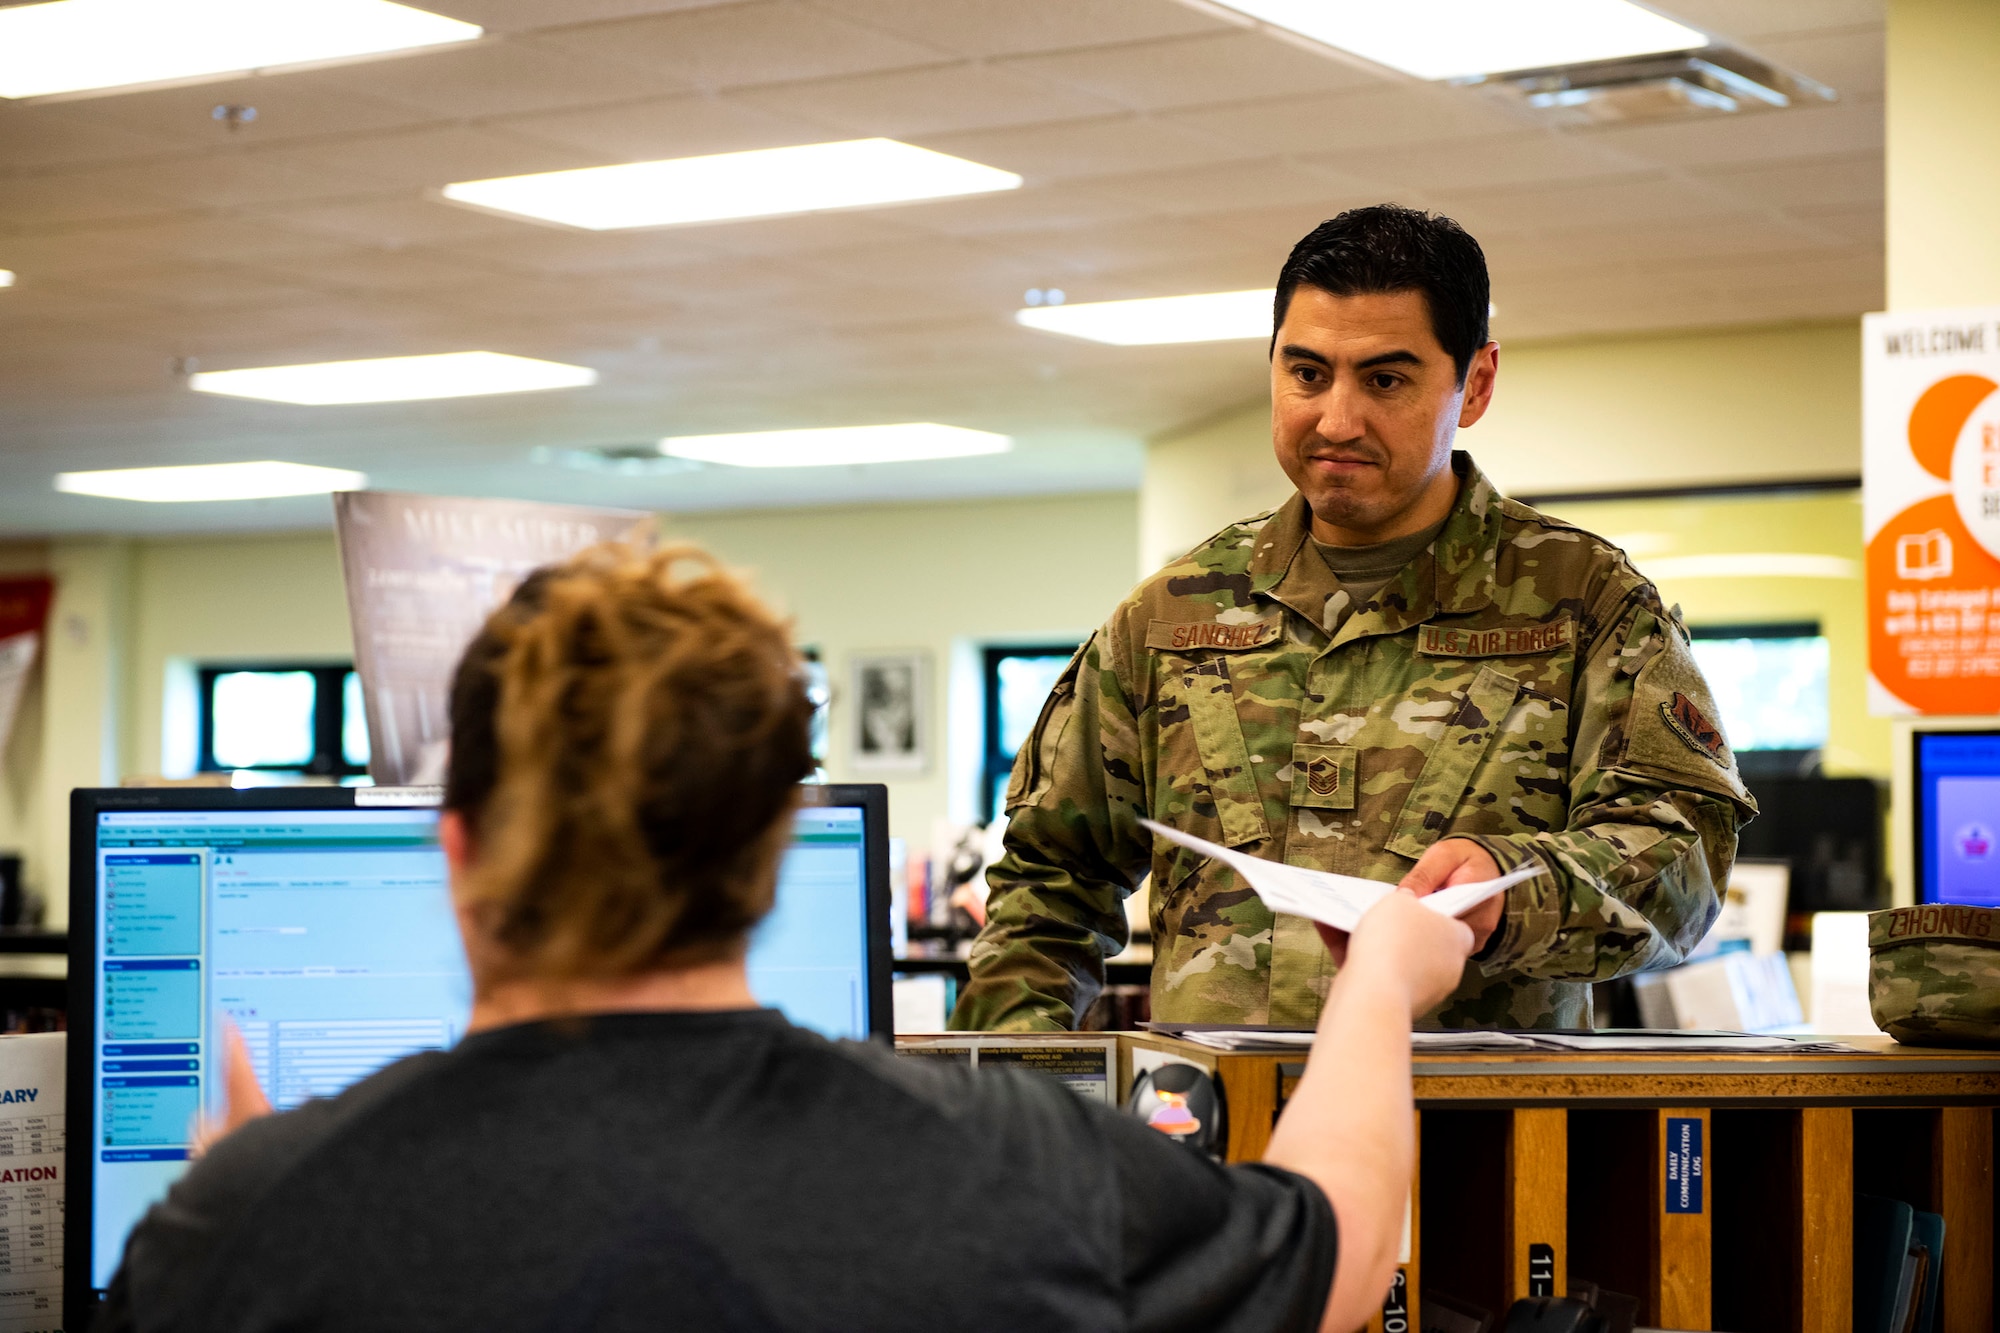 Master Sgt. Brian Sanchez, right, 23d Medical Support Squadron laboratory and diagnostic imaging flight chief, gets assistance from Katrina True, 23d Force Support Squadron library aid, Sept. 5, 2019, at Moody Air Force Base, Ga. The Information Learning Center serves as the central hub for all informational and educational growth for Airmen and their families here. (U.S. Air Force photo by Senior Airman Erick Requadt)